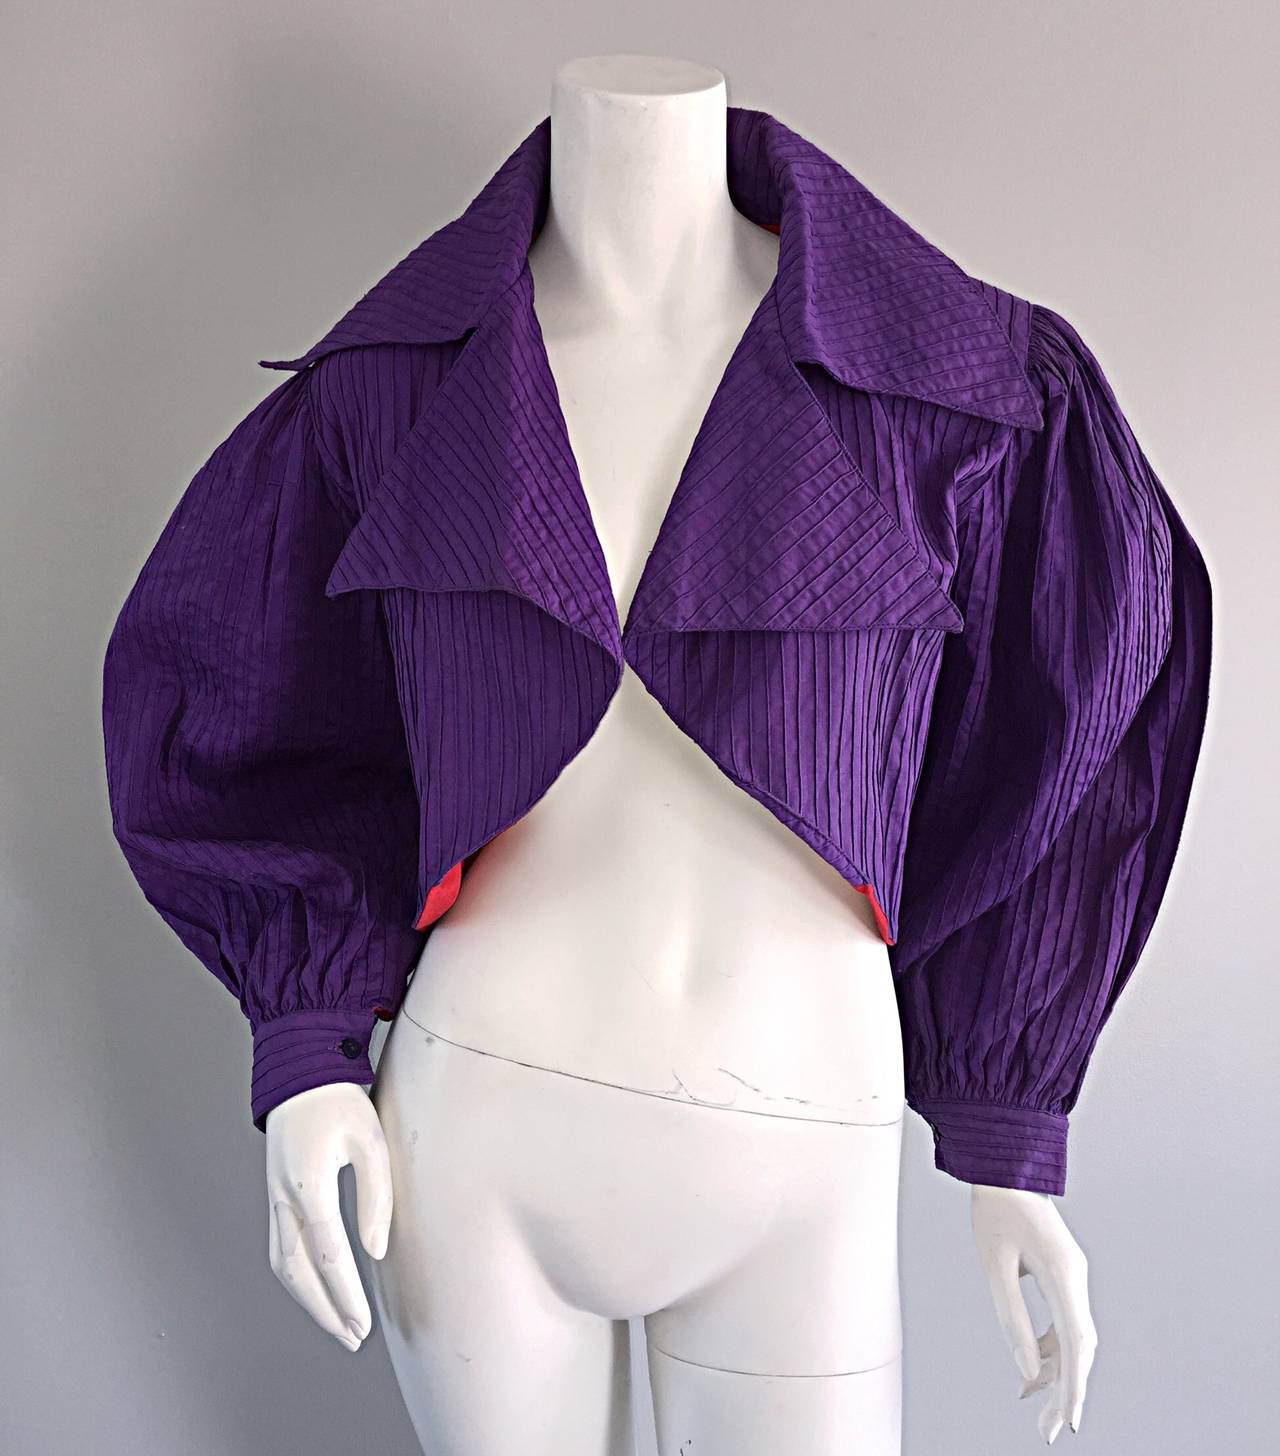 Amazing vintage Tachi Castillo purple cotton cropped blazer jacket! Vibrant purple color of textured cotton, with a red cotton lining. Dramatic sleeves, with an impressive collar! Can easily be dressed up or down. Looks great with jeans, shorts, a